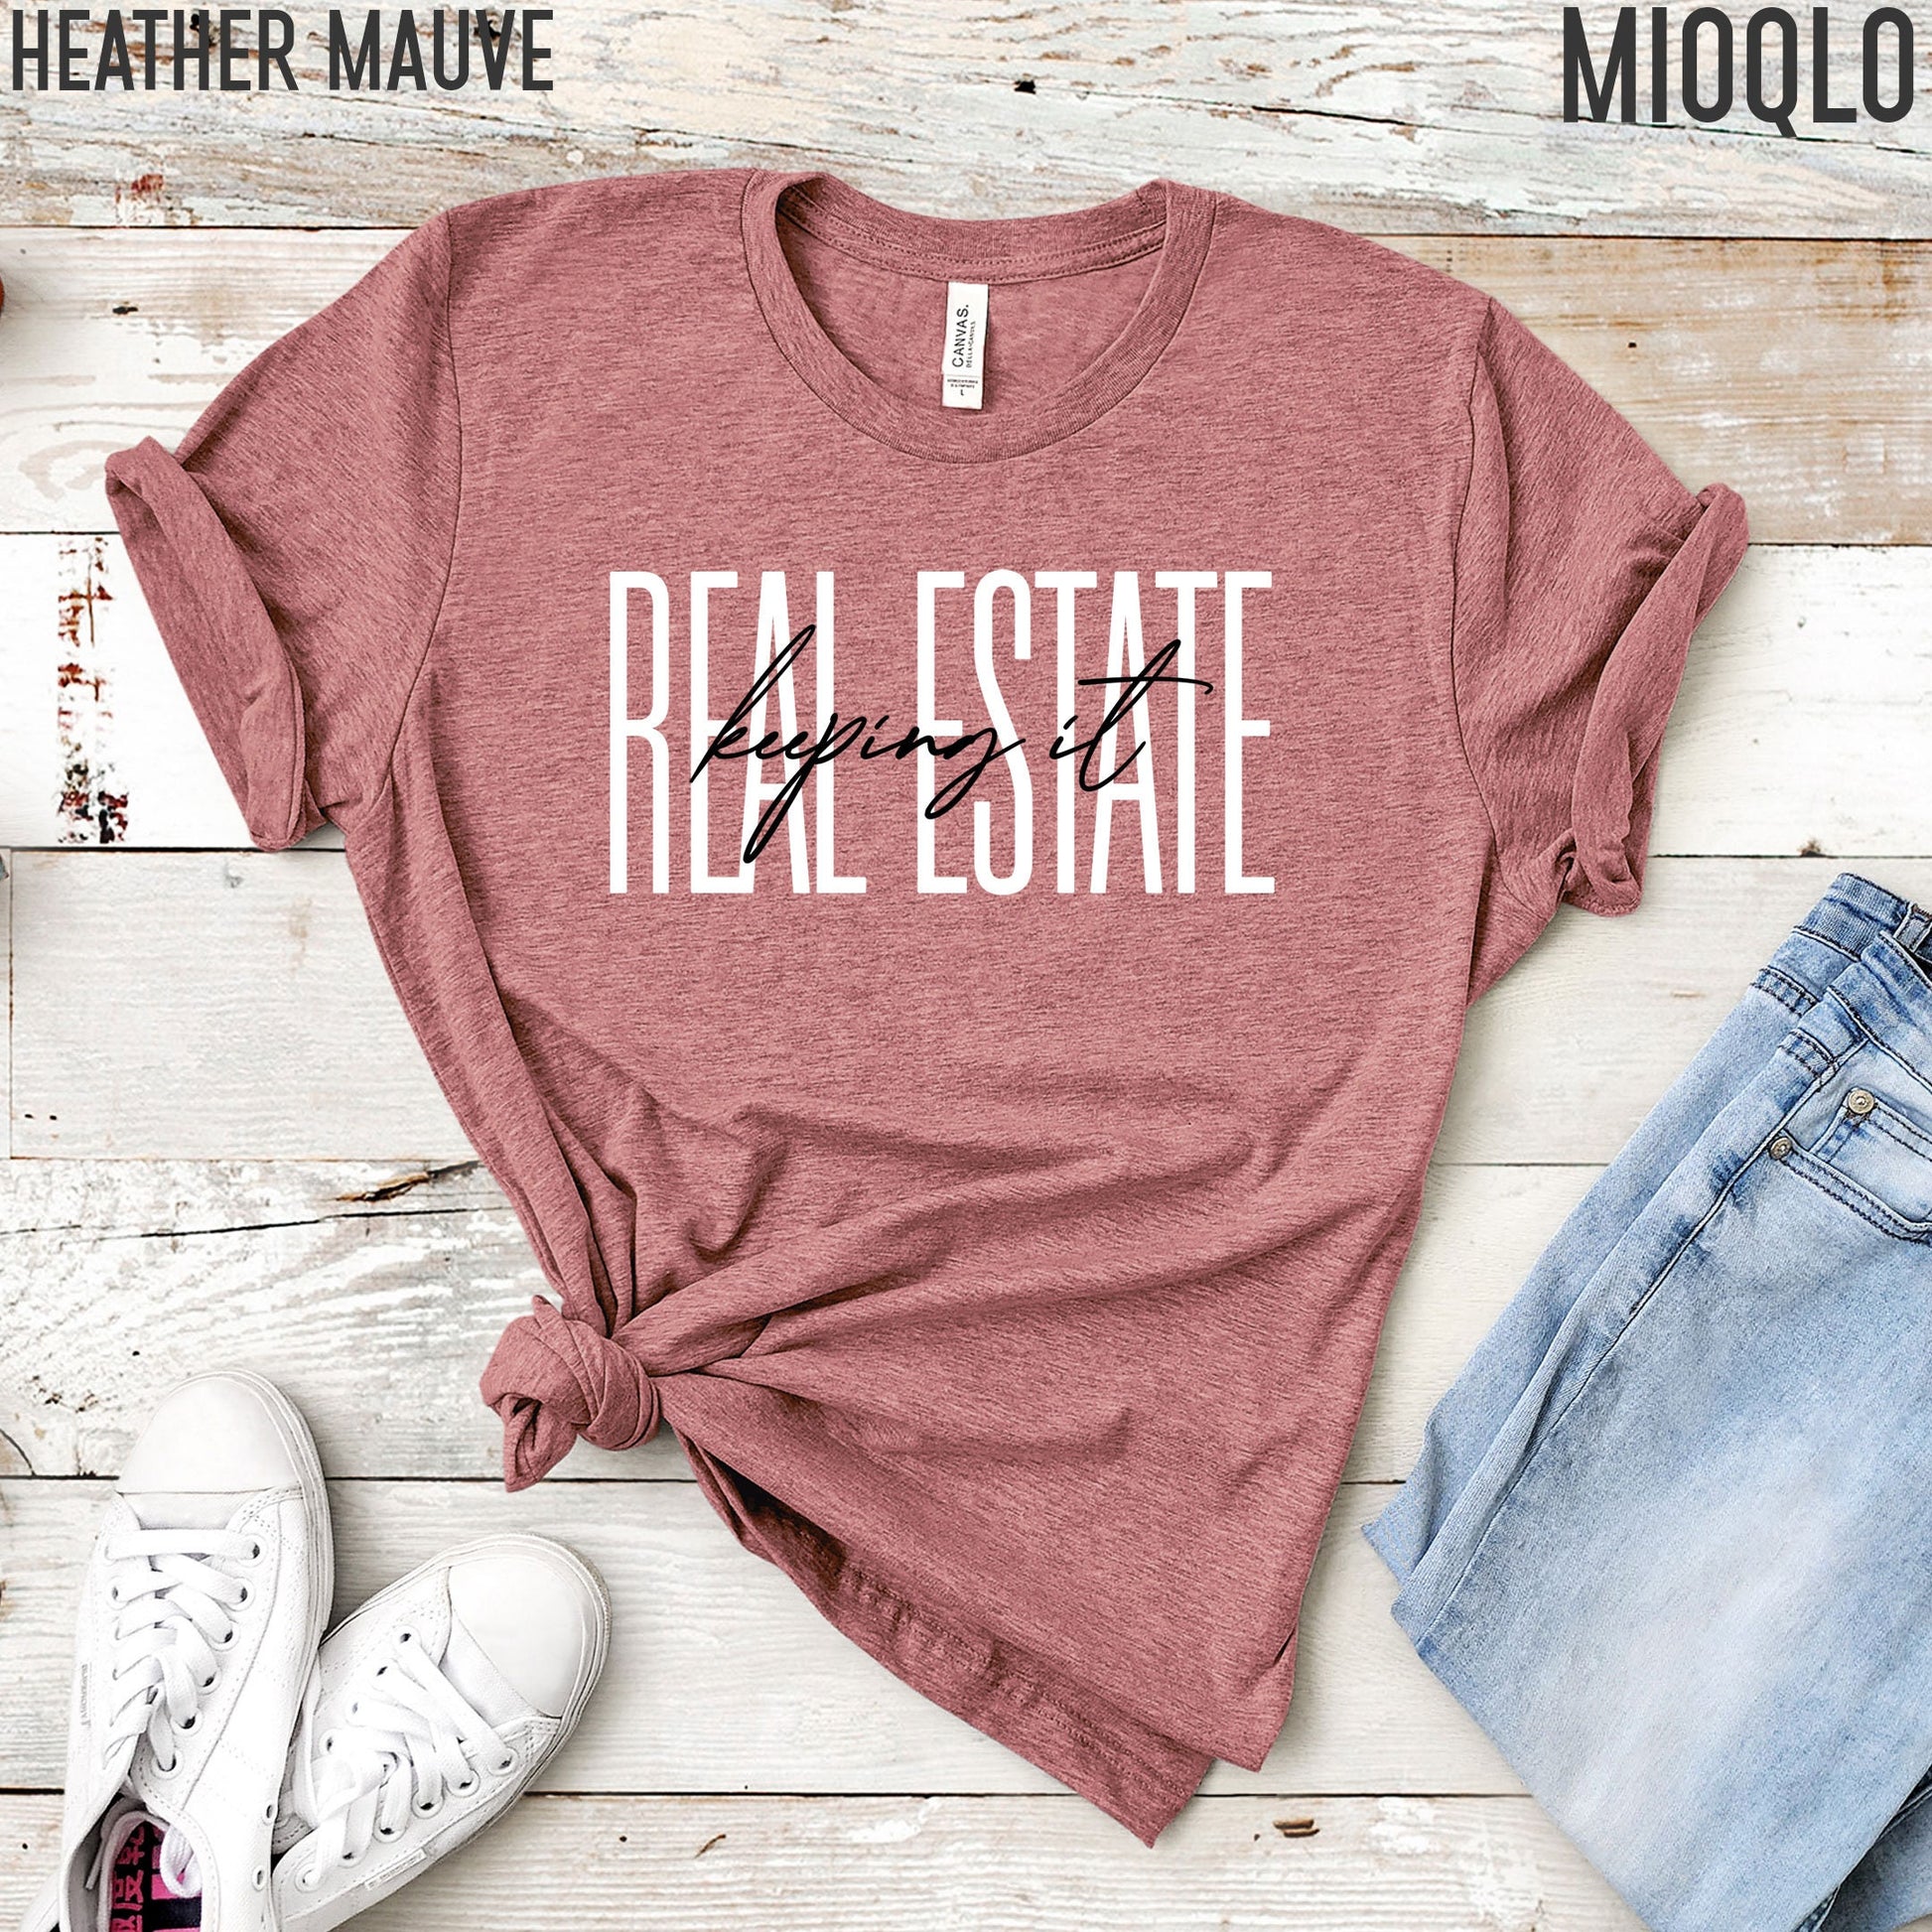 Keeping It Real Estate Shirt, Mortgage Funny Realtor Tee, Real Estate Agent Life, Home Girl Tank, House Dealer Tee, Realtor Broker Vibes Top